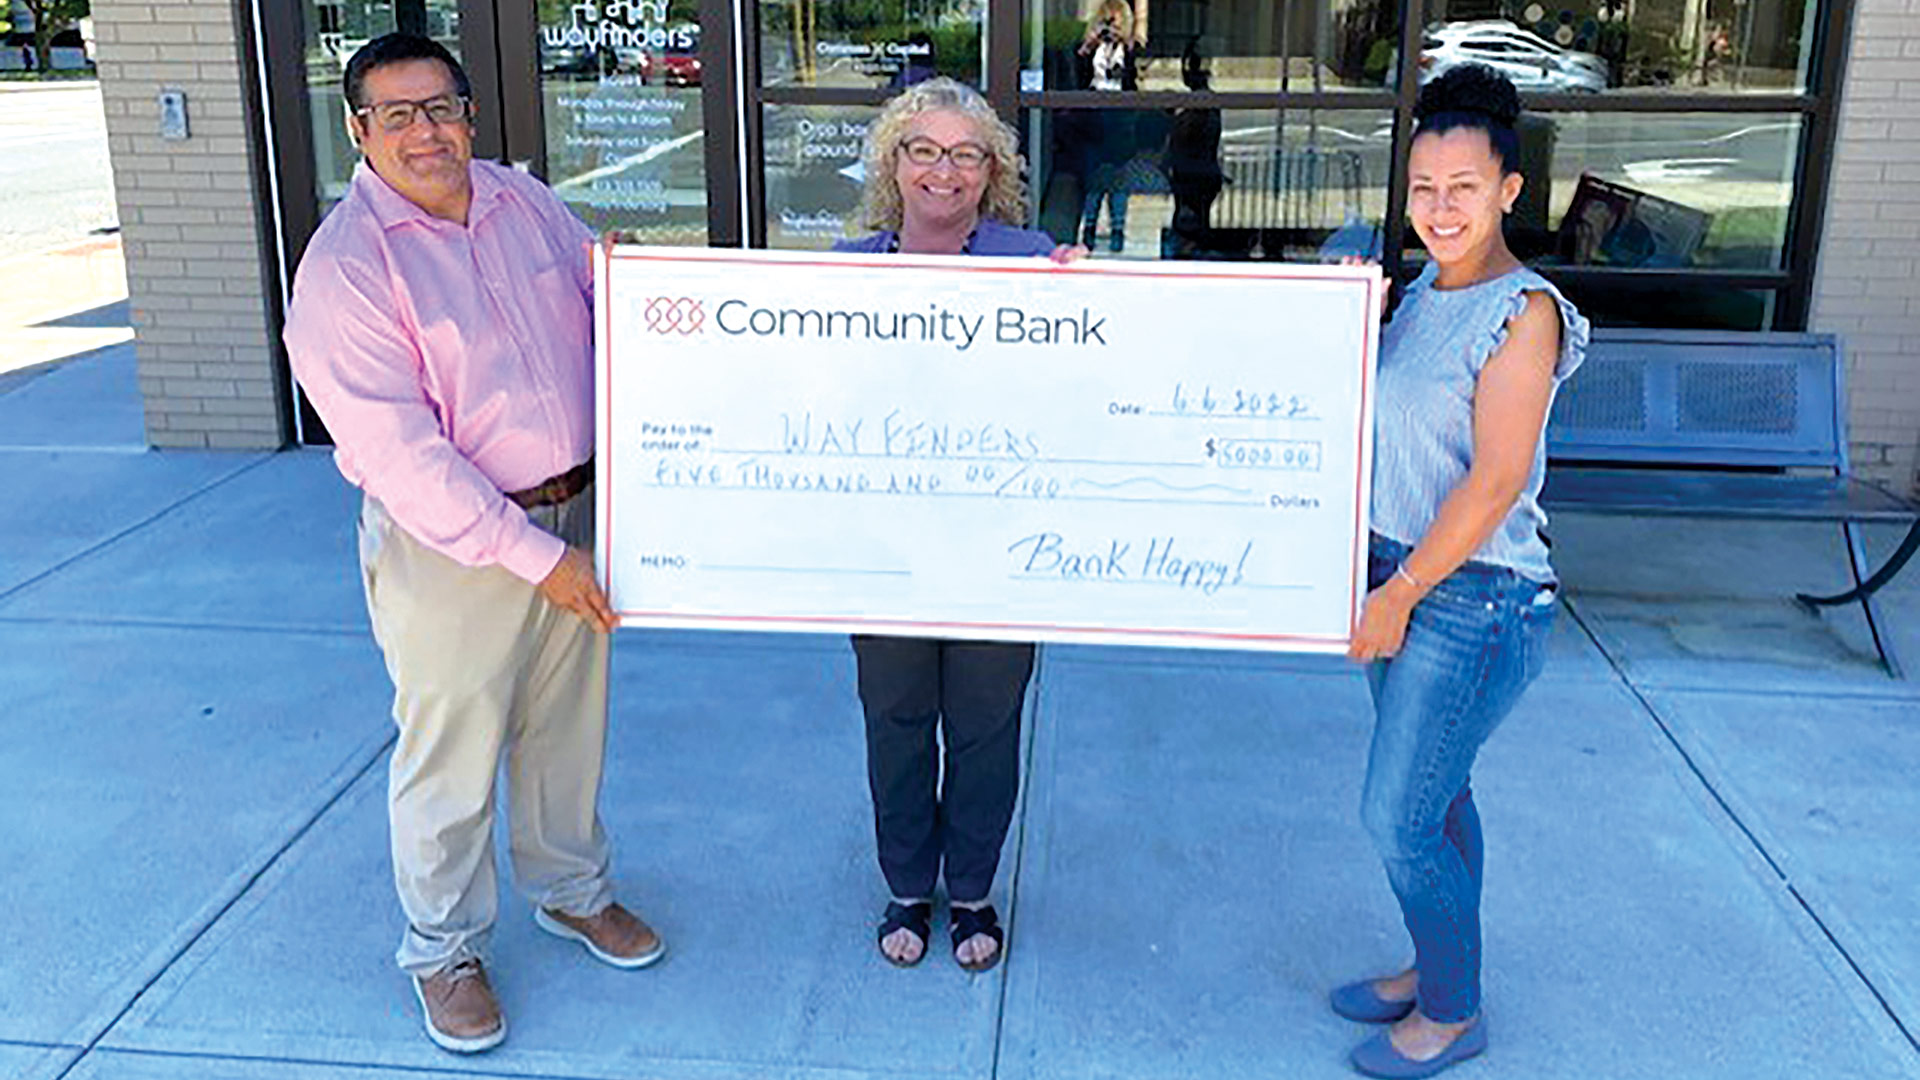 From left, Community Bank Branch Manager Gilbert Nieves, Mortgage Loan Officer Sandra Desautels and Way Finders Homeownership & Financial Education Manager Araceli Rivera.